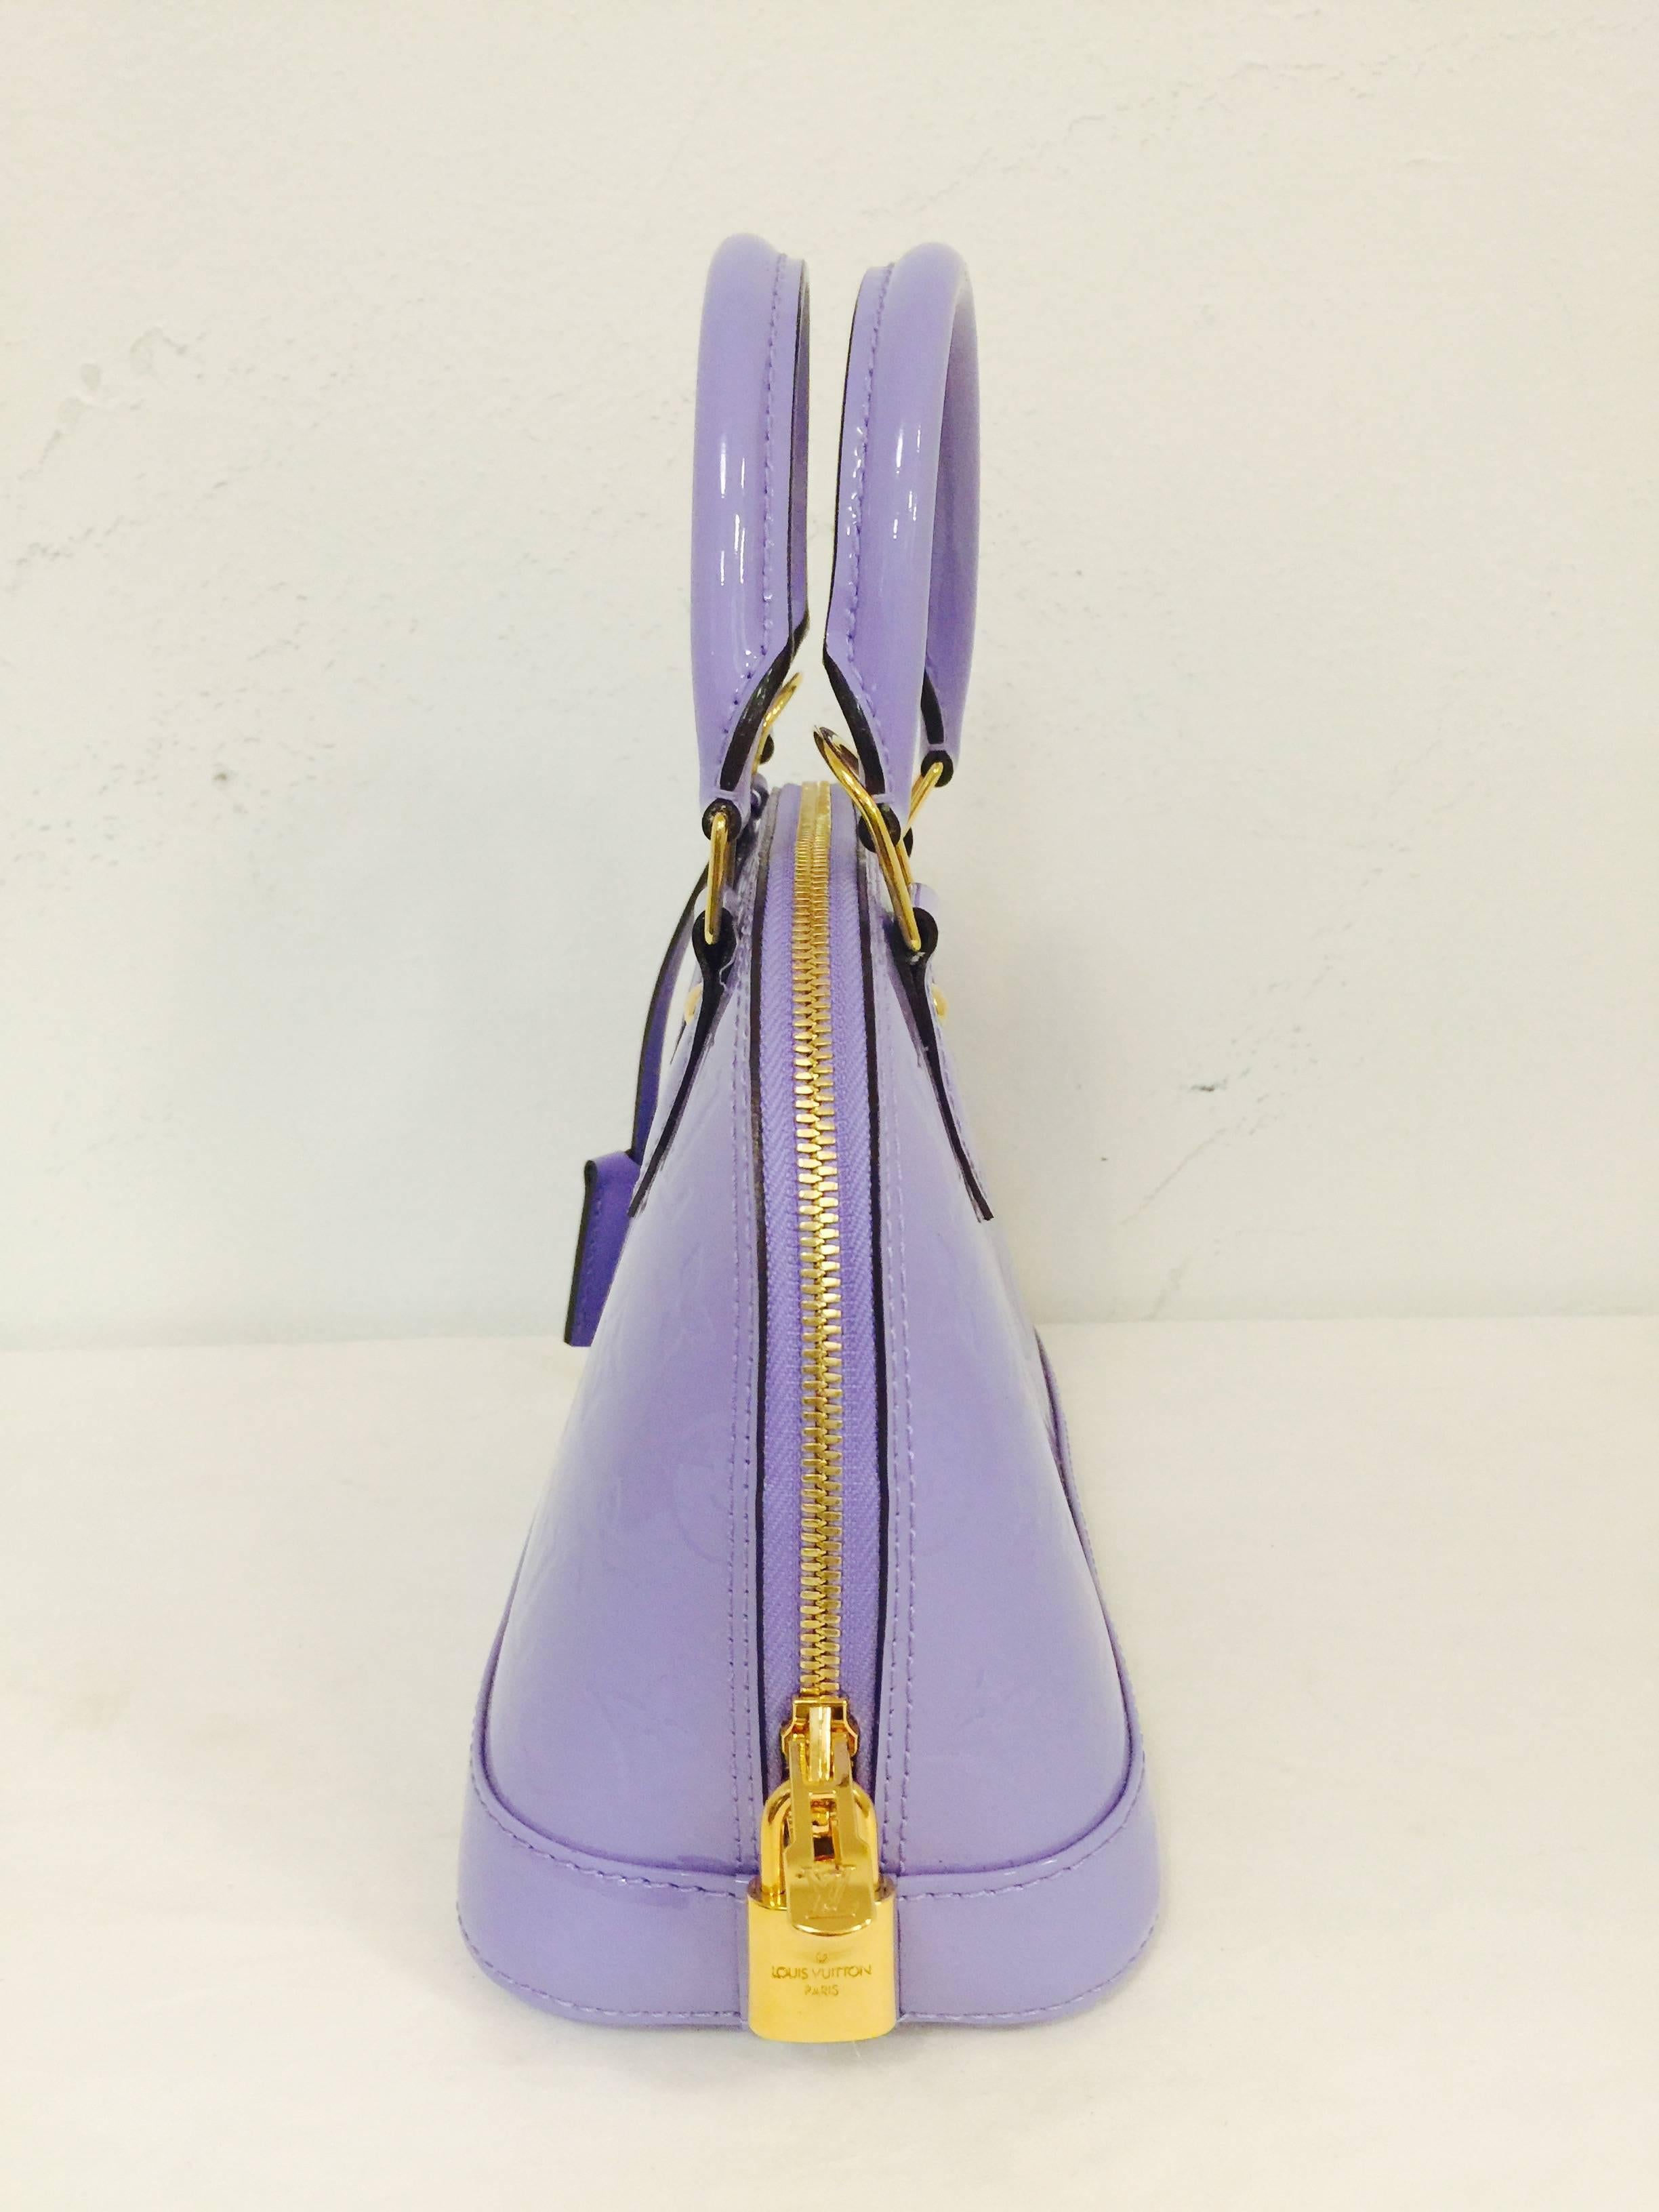 Louis Vuitton 2014 Spring Limited Edition Vernis Alma BB MV Lilias Bag   In Excellent Condition For Sale In Palm Beach, FL